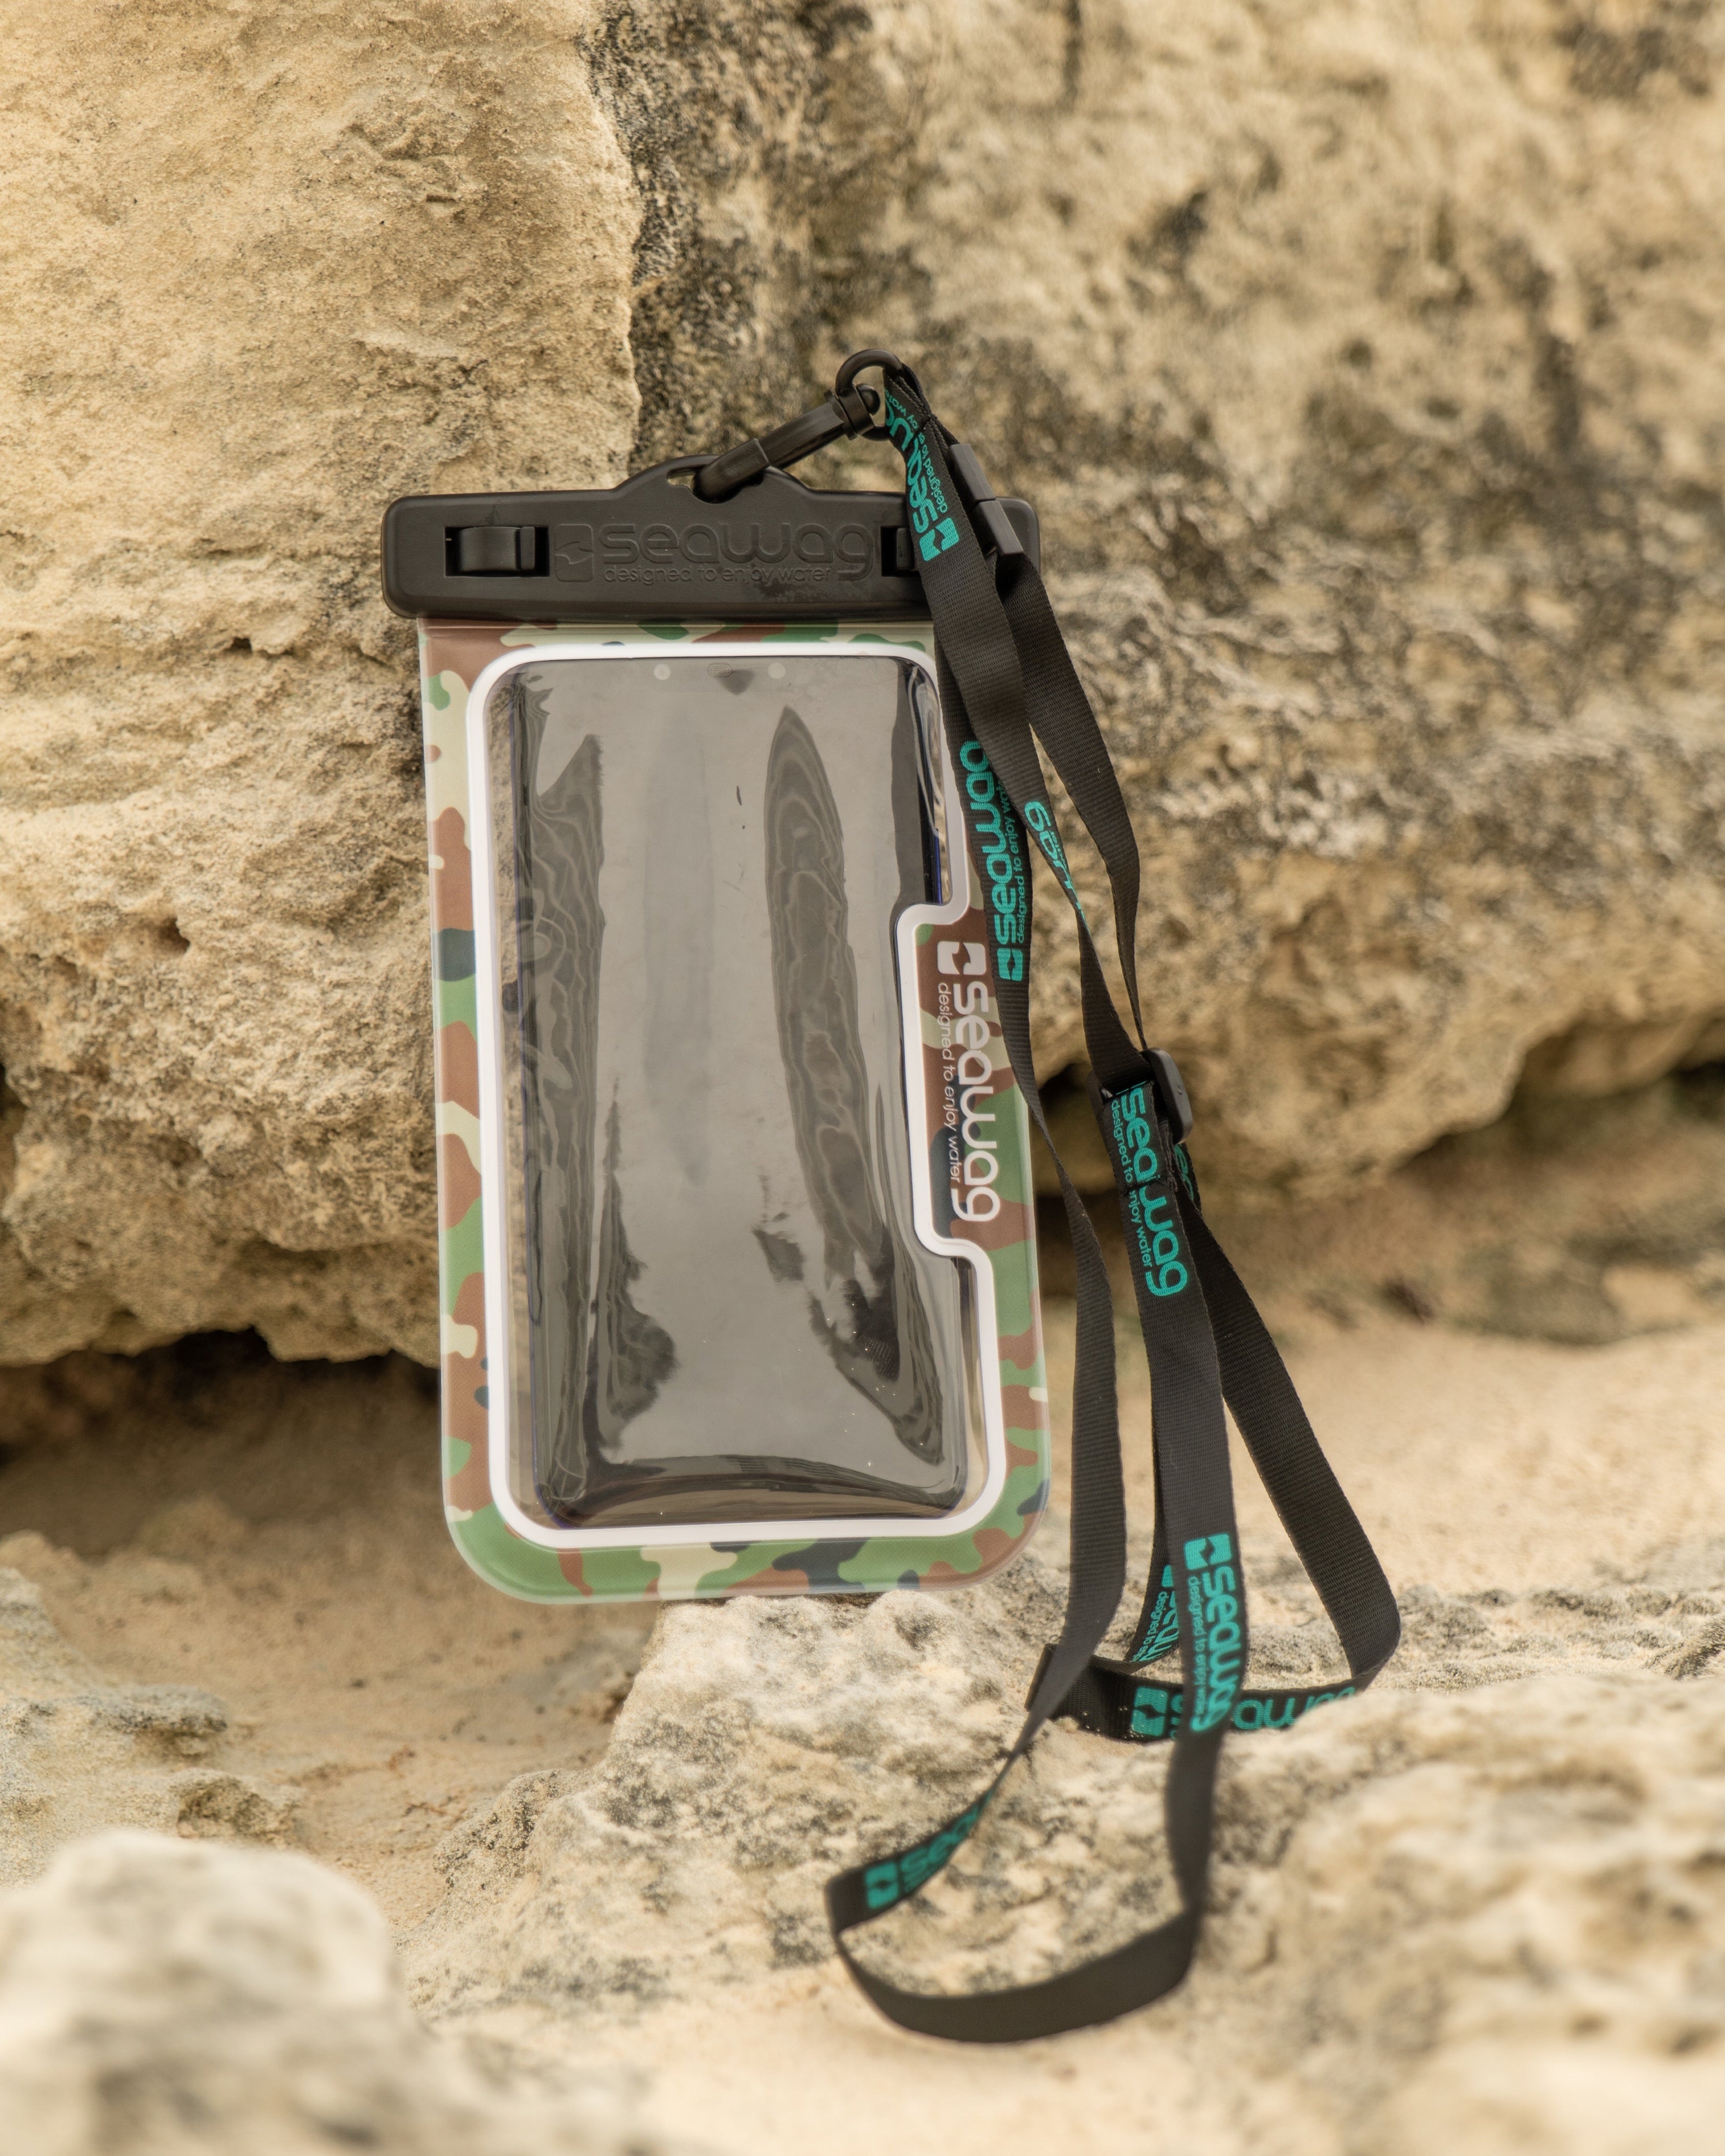 Universal Waterproof Case For Smartphone - Camouflage